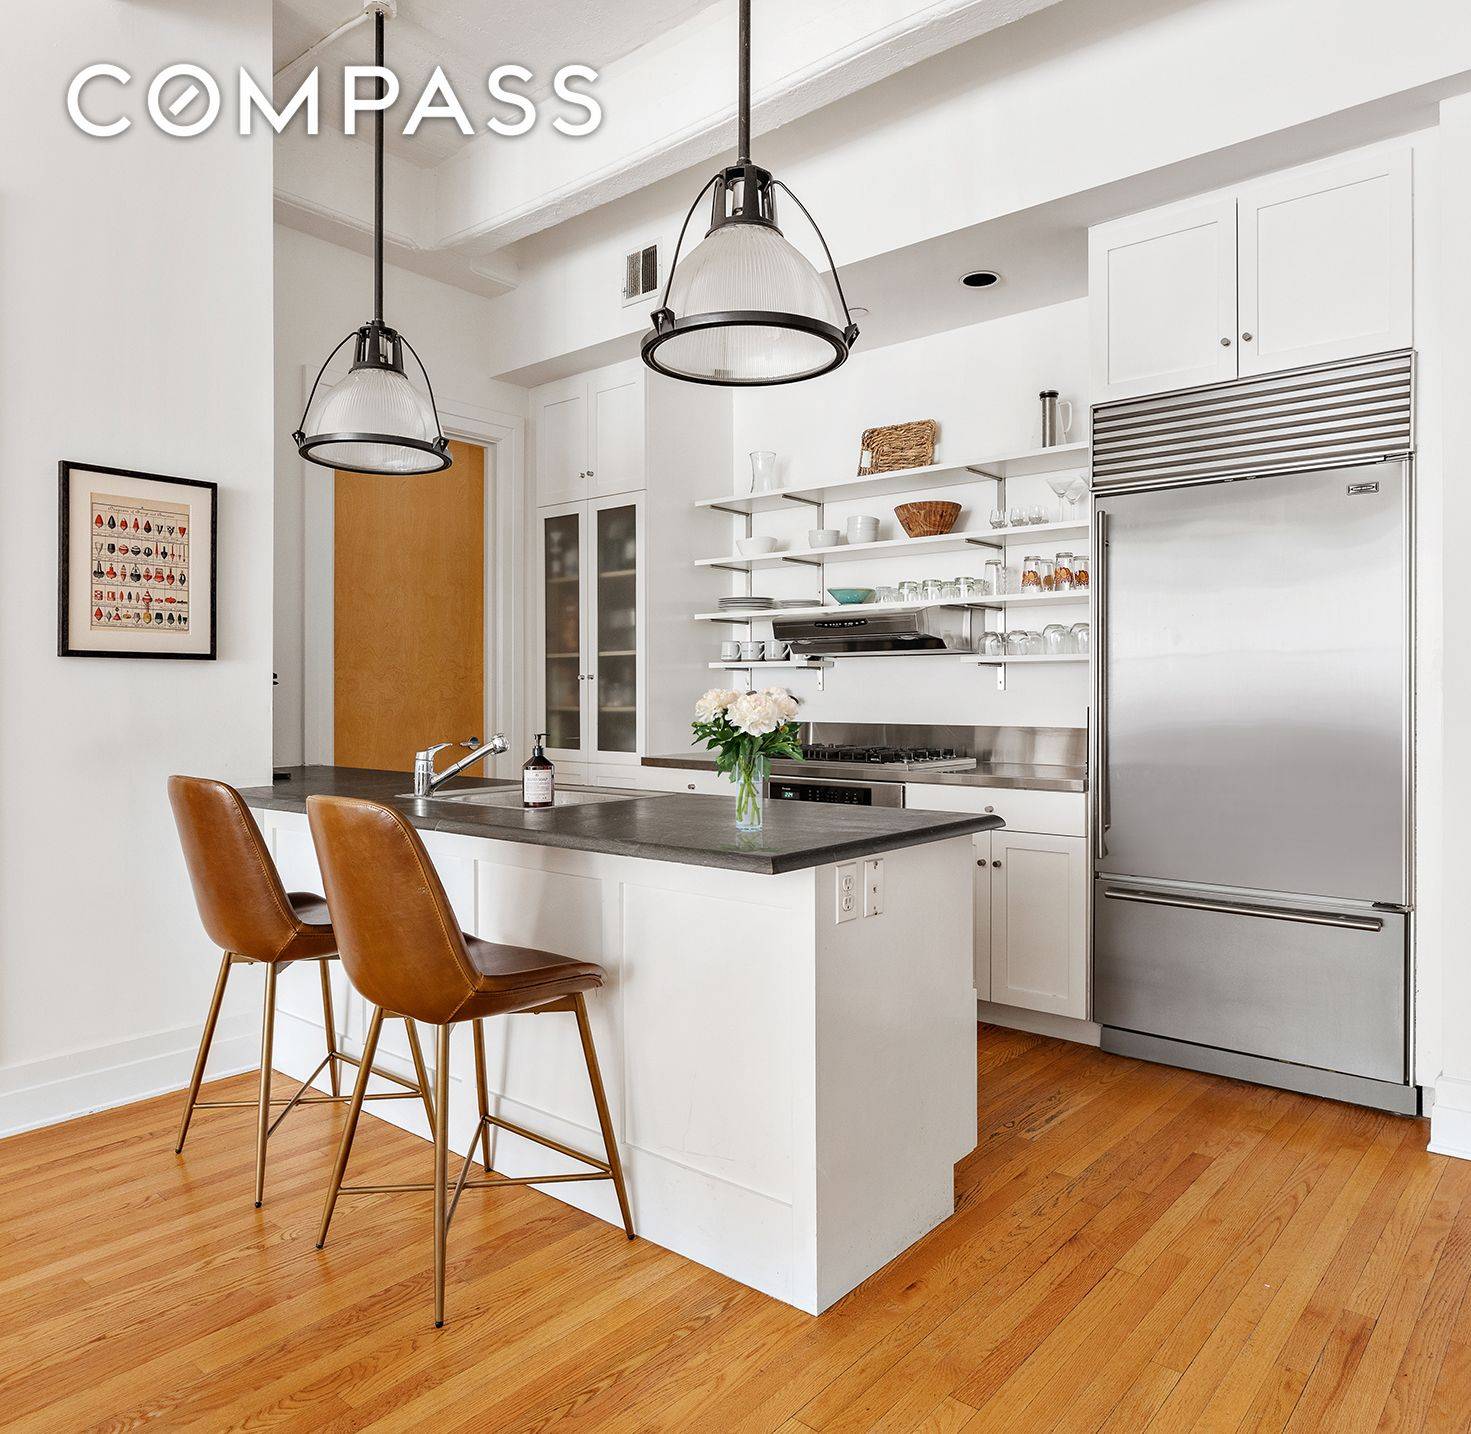 ONE OF THE BEST PRICED CLASSIC LOFTS IN DUMBO !